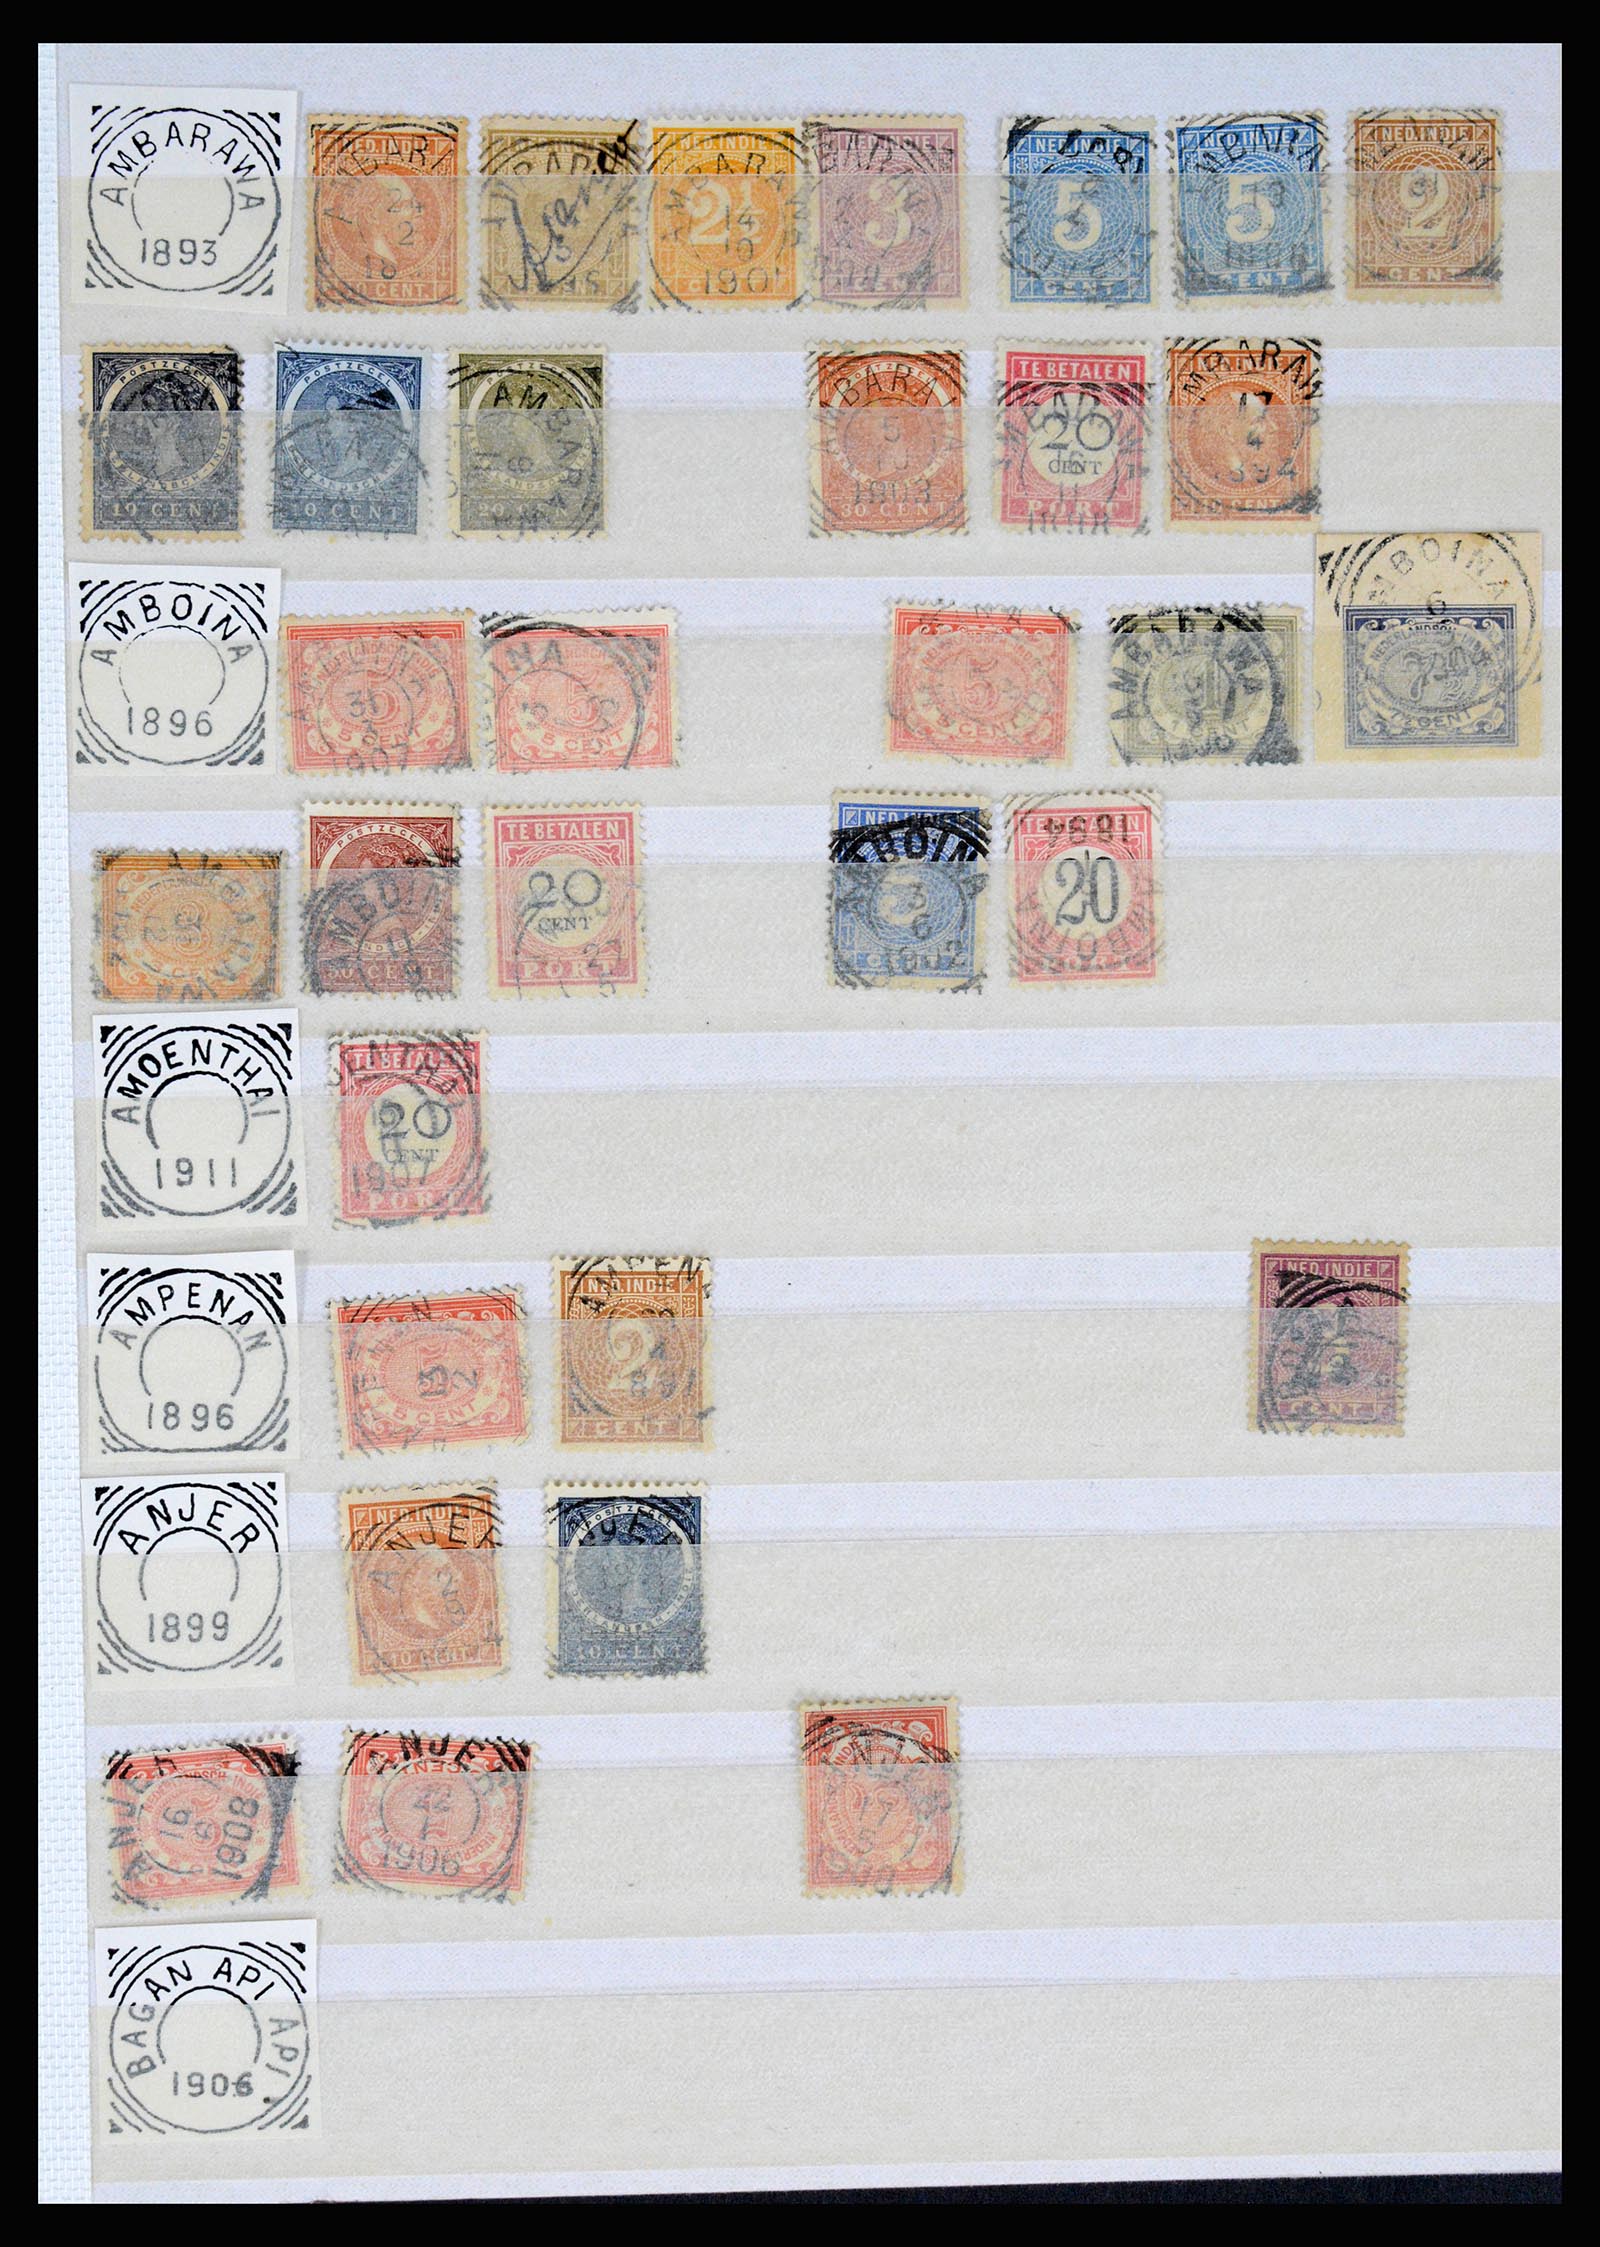 36839 060 - Stamp collection 36839 Dutch east Indies square cancels.